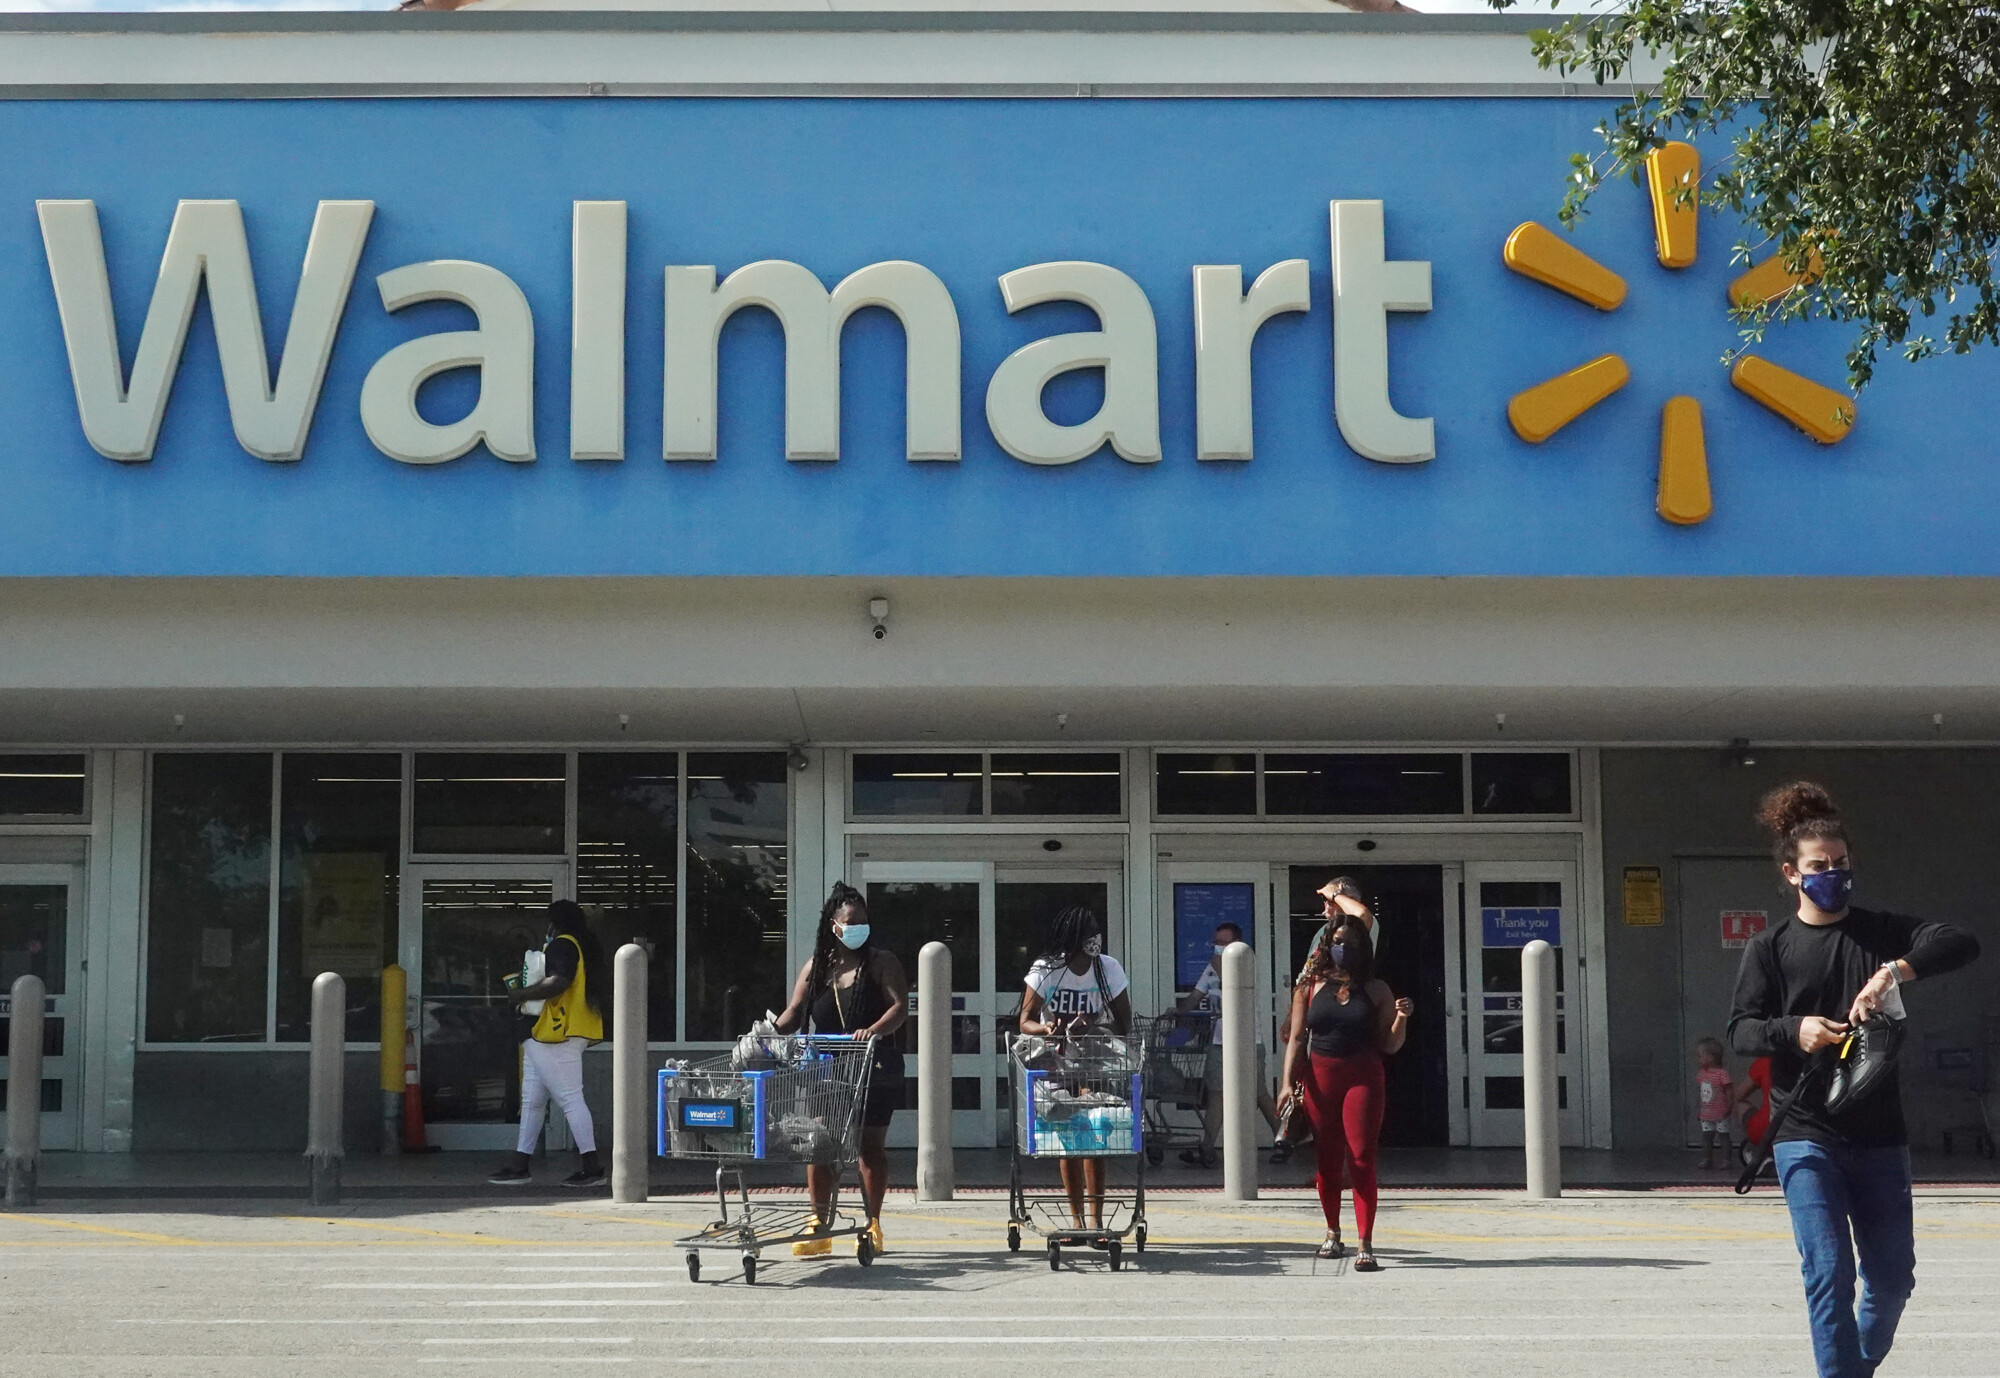 FTC Sues Walmart for Allegedly Allowing Money Transfer Services for Fraud